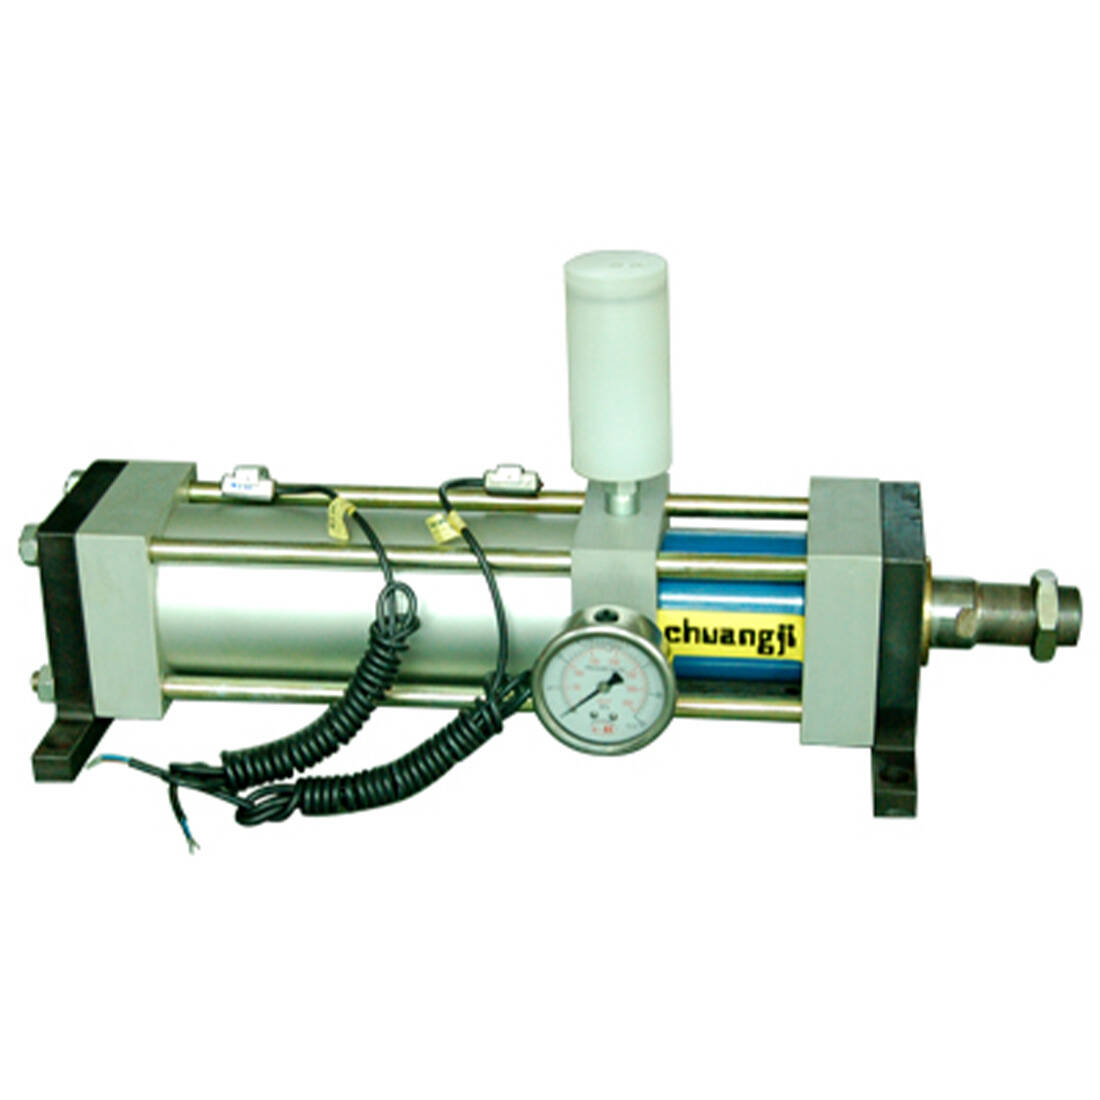 MPTC-8T Direct Pressure Booster Cylinder